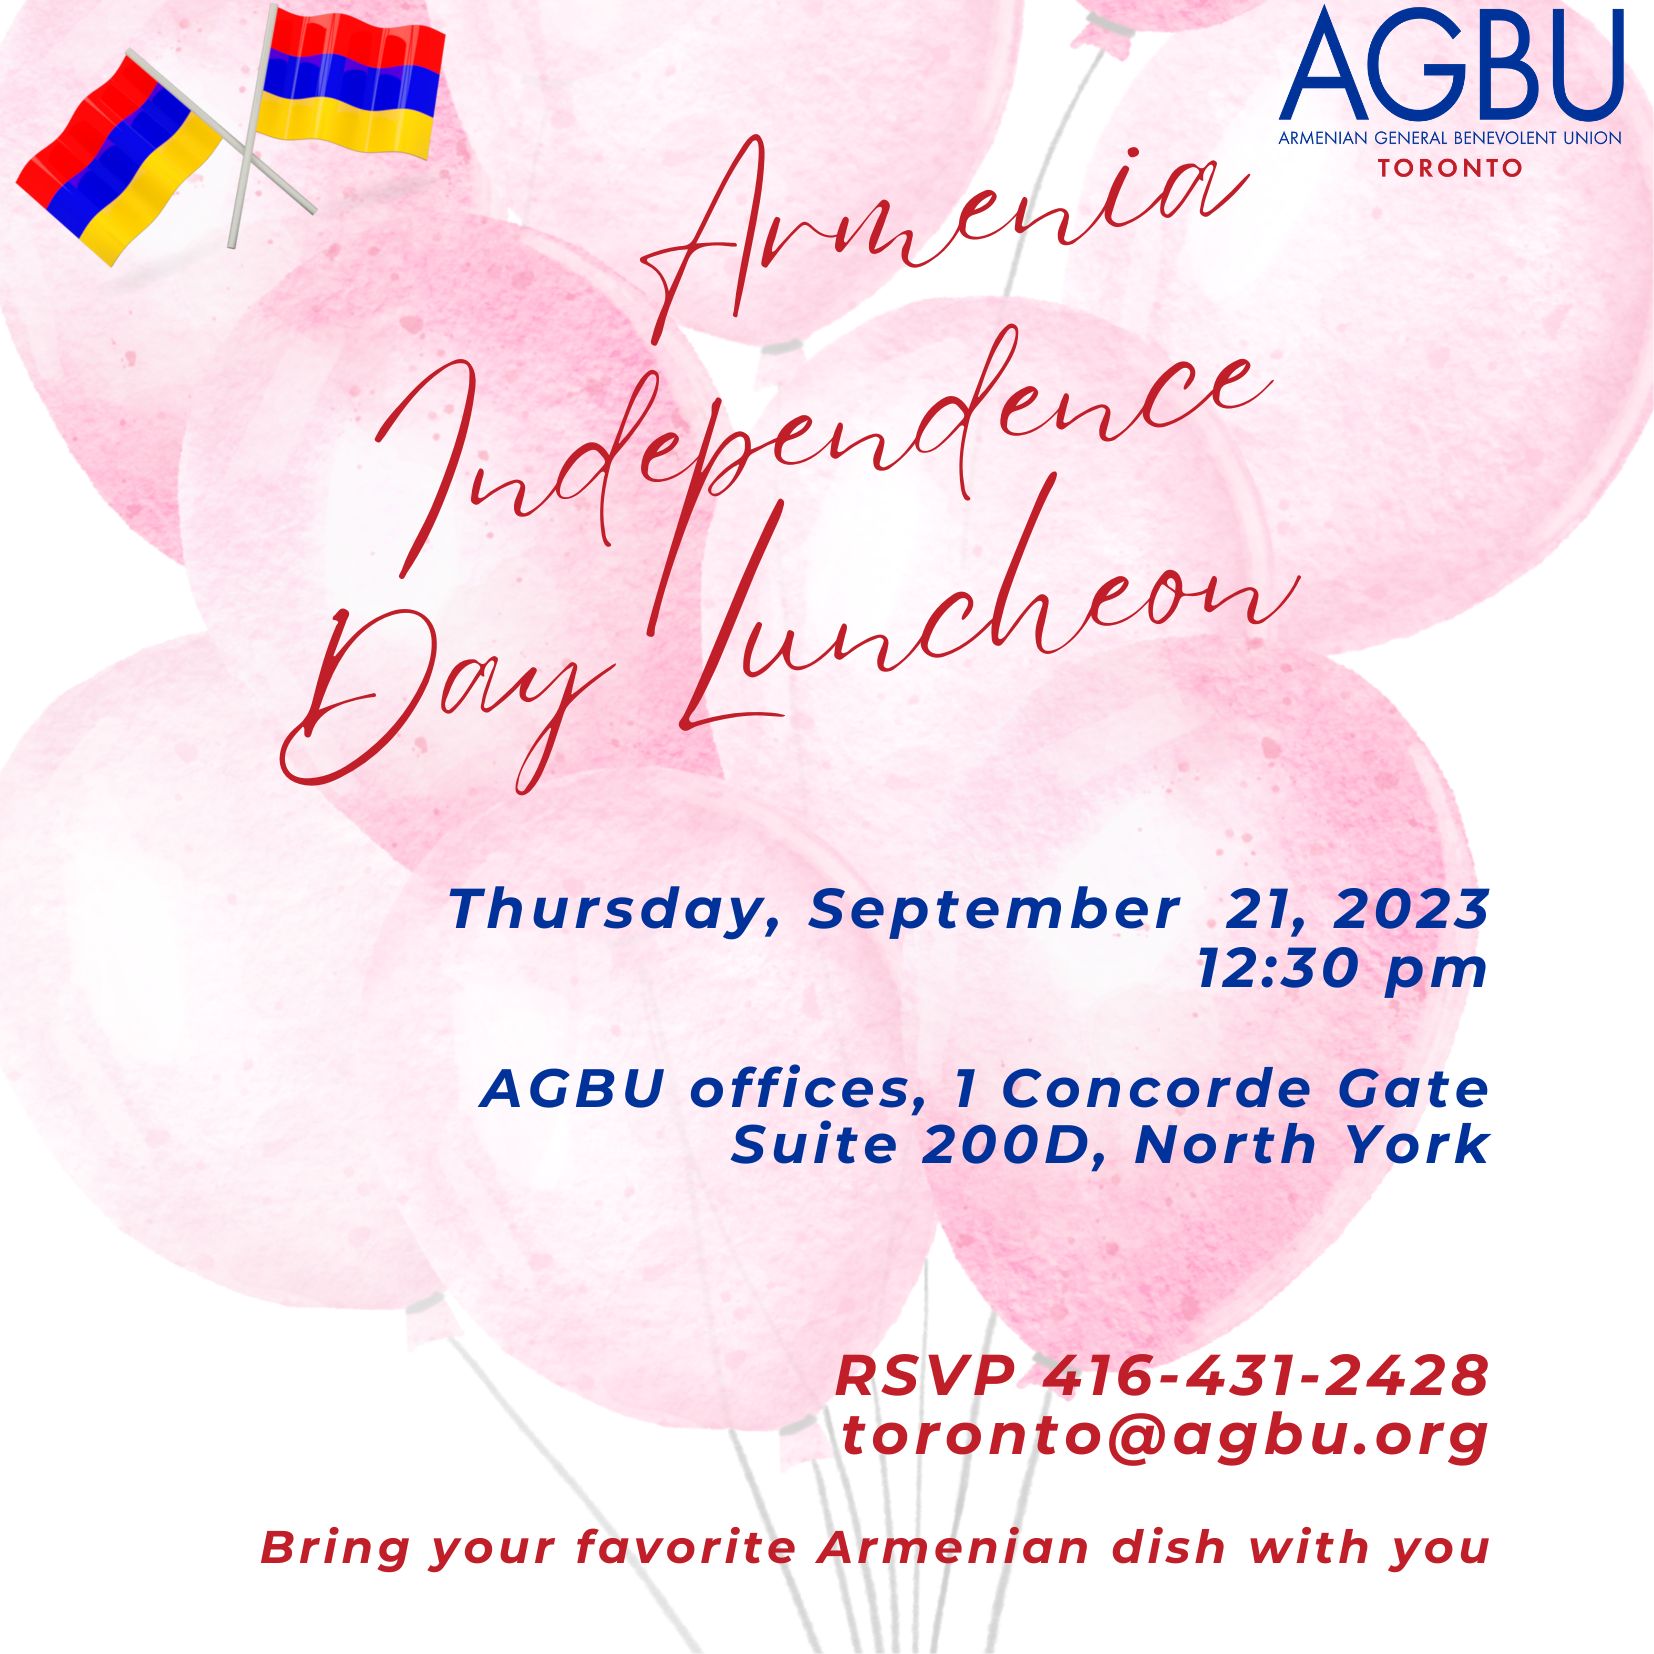 Armenia Independence Day Luncheon